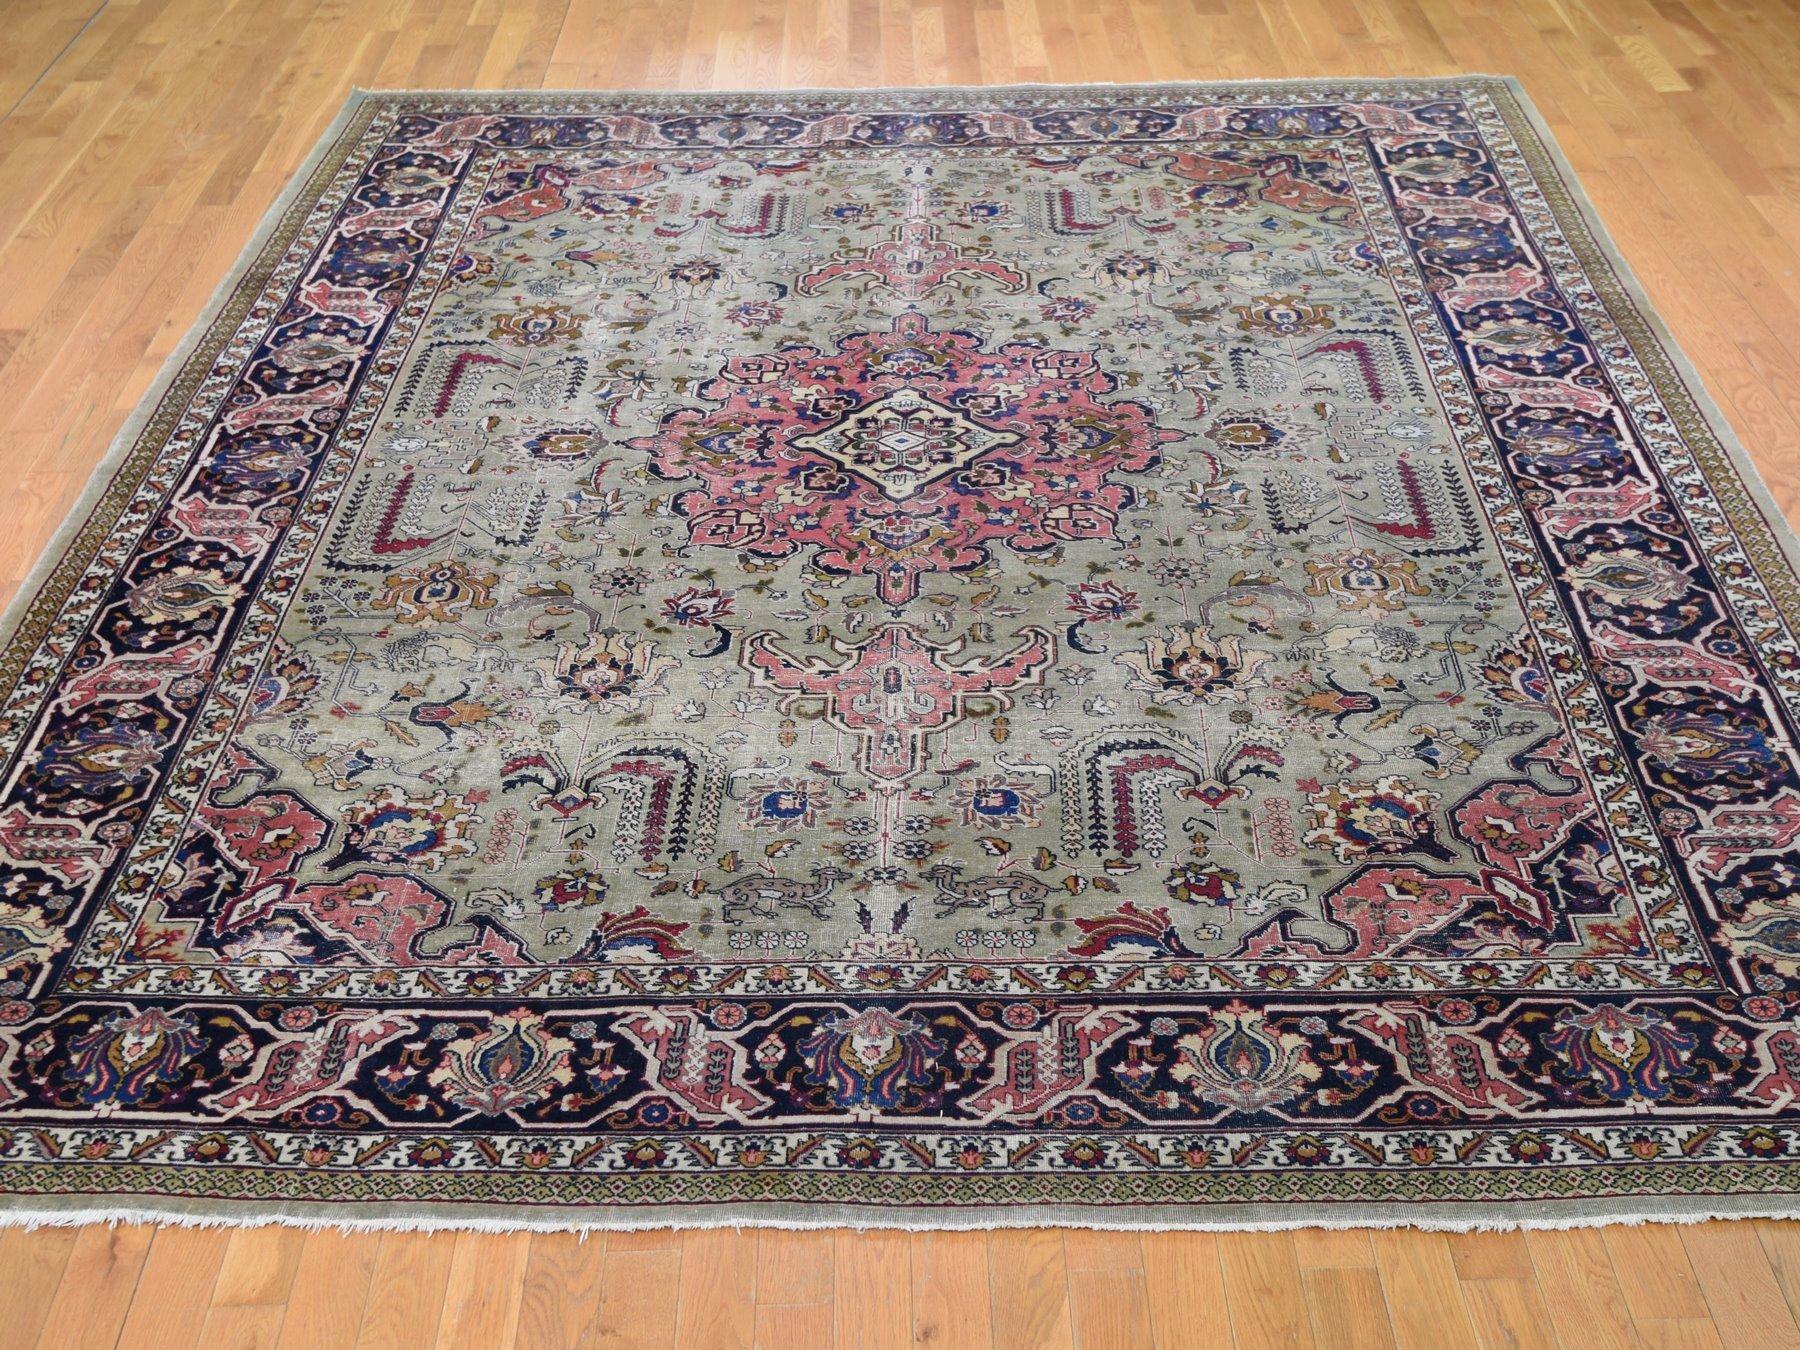 Medieval Taupe Green Worn Old Persian Tabriz Vintage Distressed and Clean Bohemian Rug